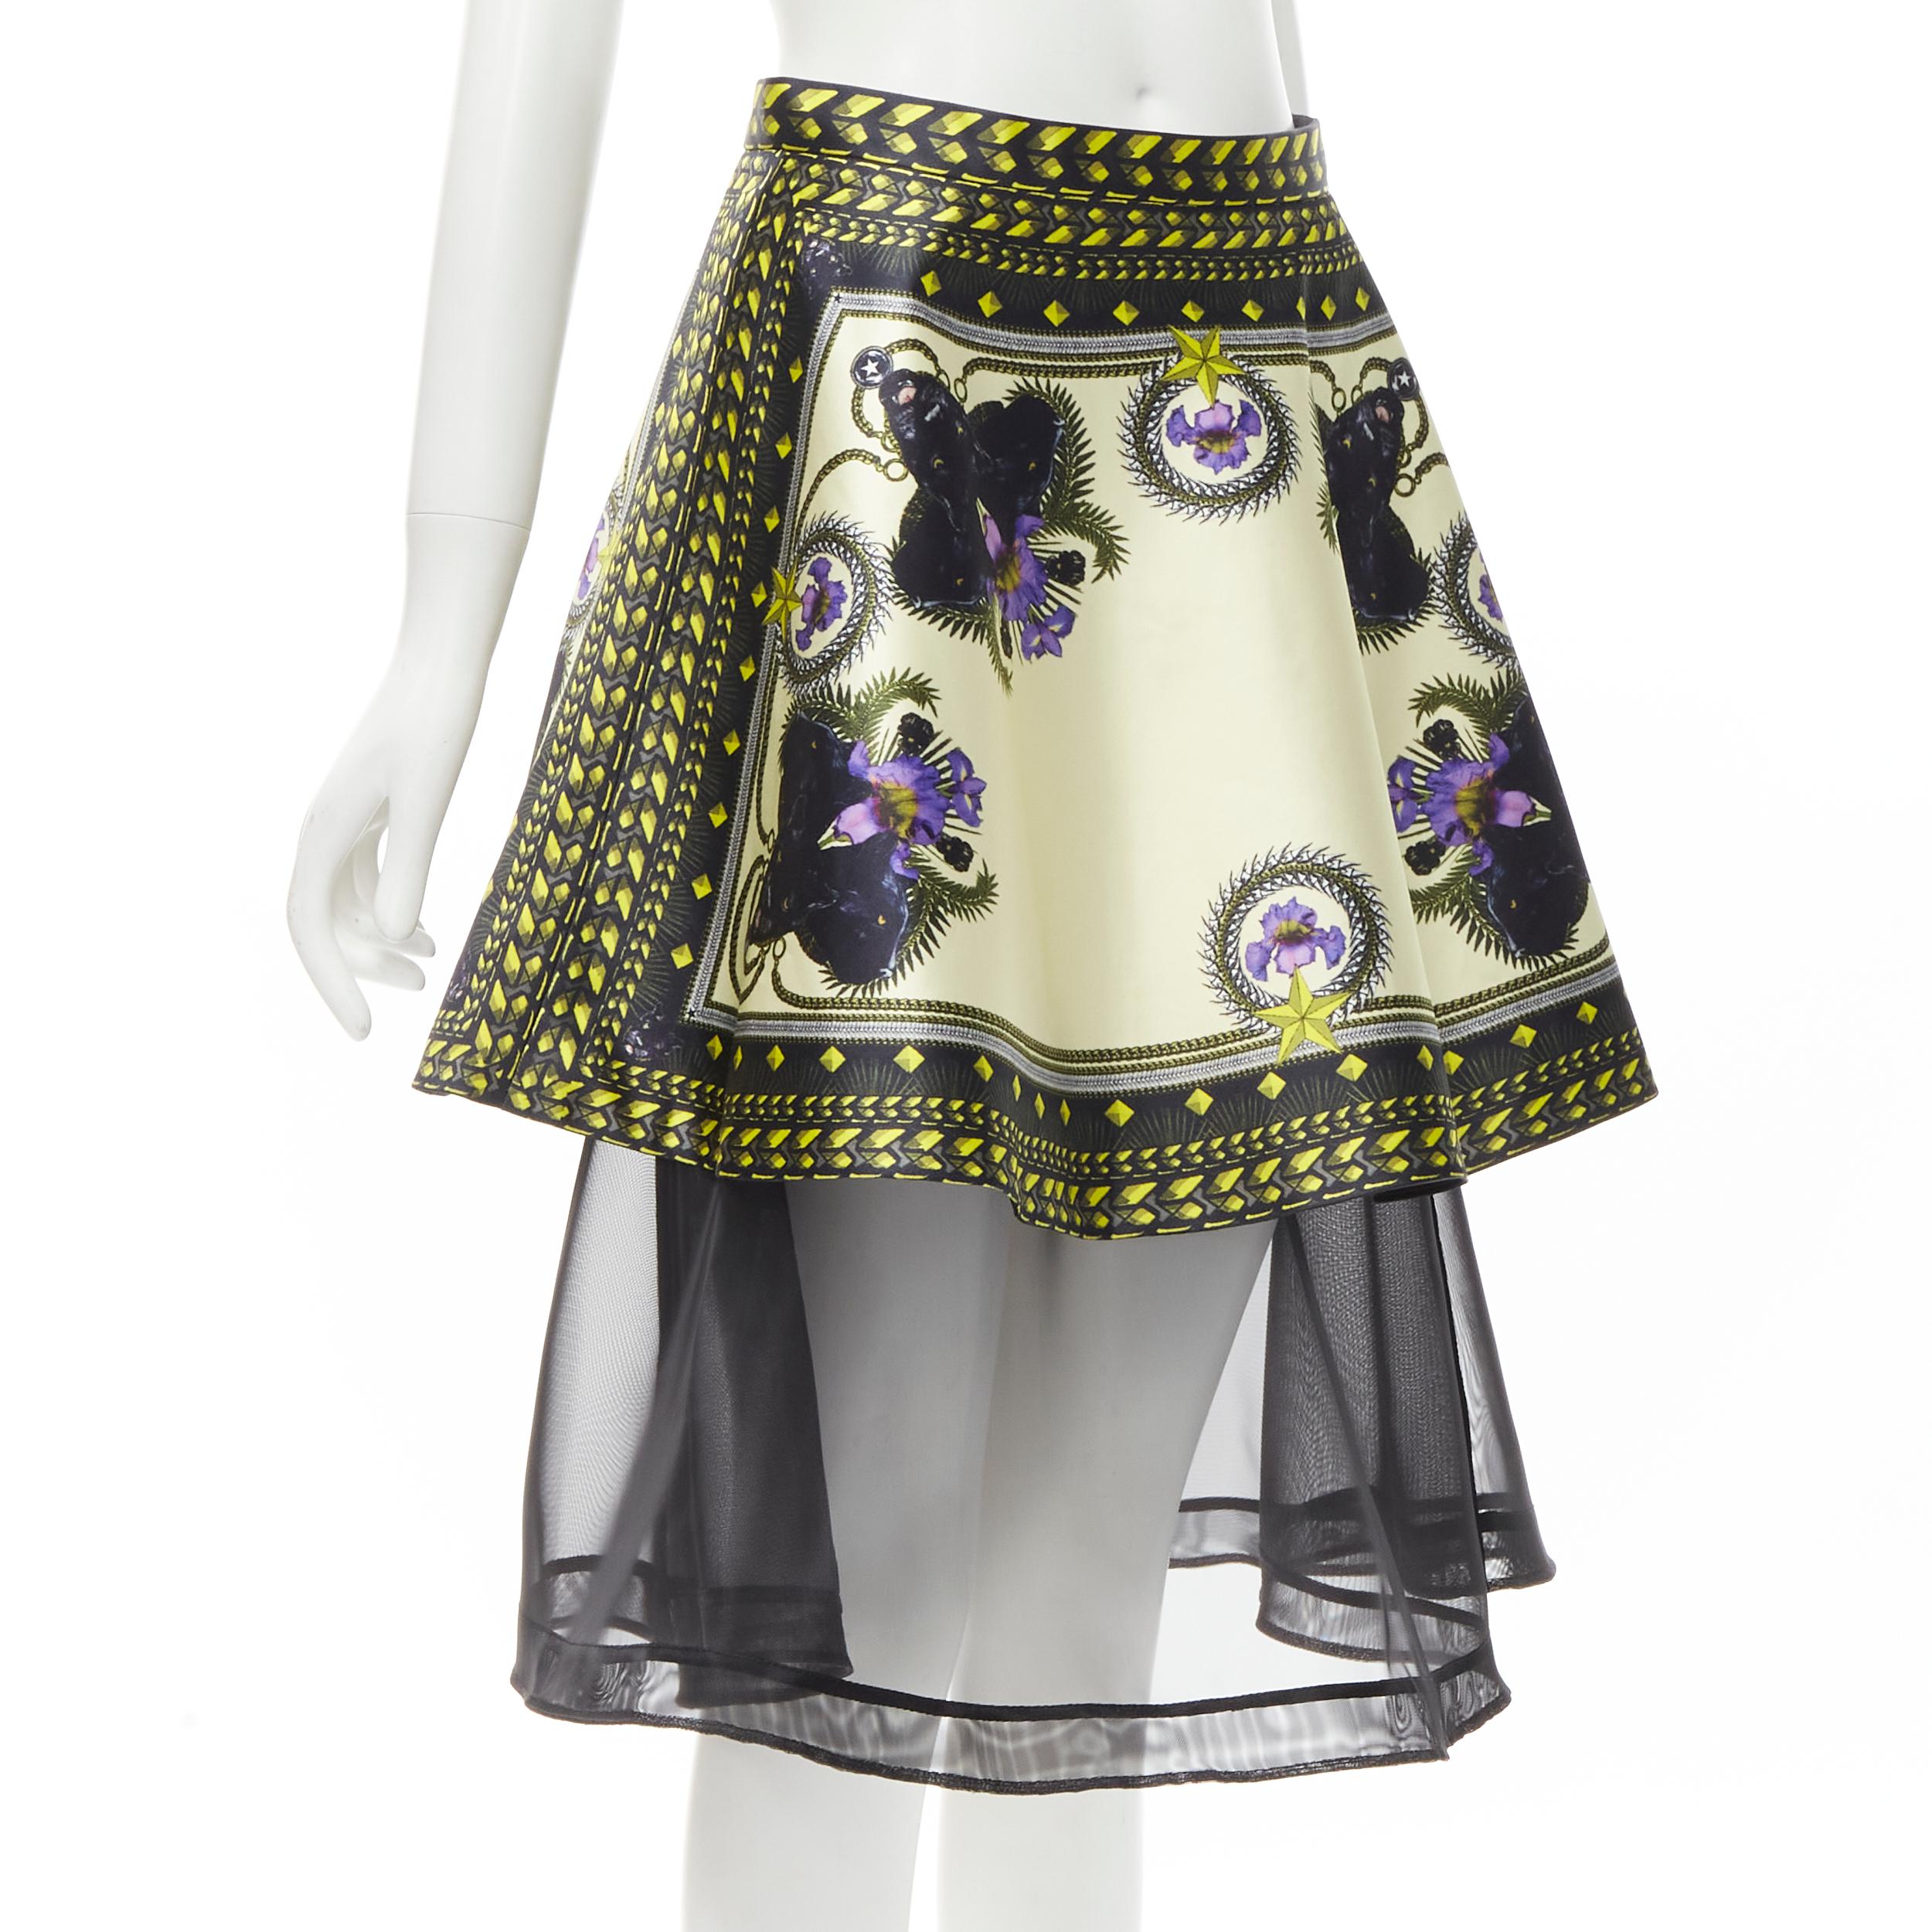 rare GIVENCHY 2011 Riccardo Tisci Panther Orchid sheer flared skirt FR38 S
Brand: Givenchy
Designer: Riccardo Tisci
Collection: 2011 Runway
Material: Cotton
Color: Multicolour
Pattern: Panther
Closure: Zip
Extra Detail: Iconic Panther orchid gold